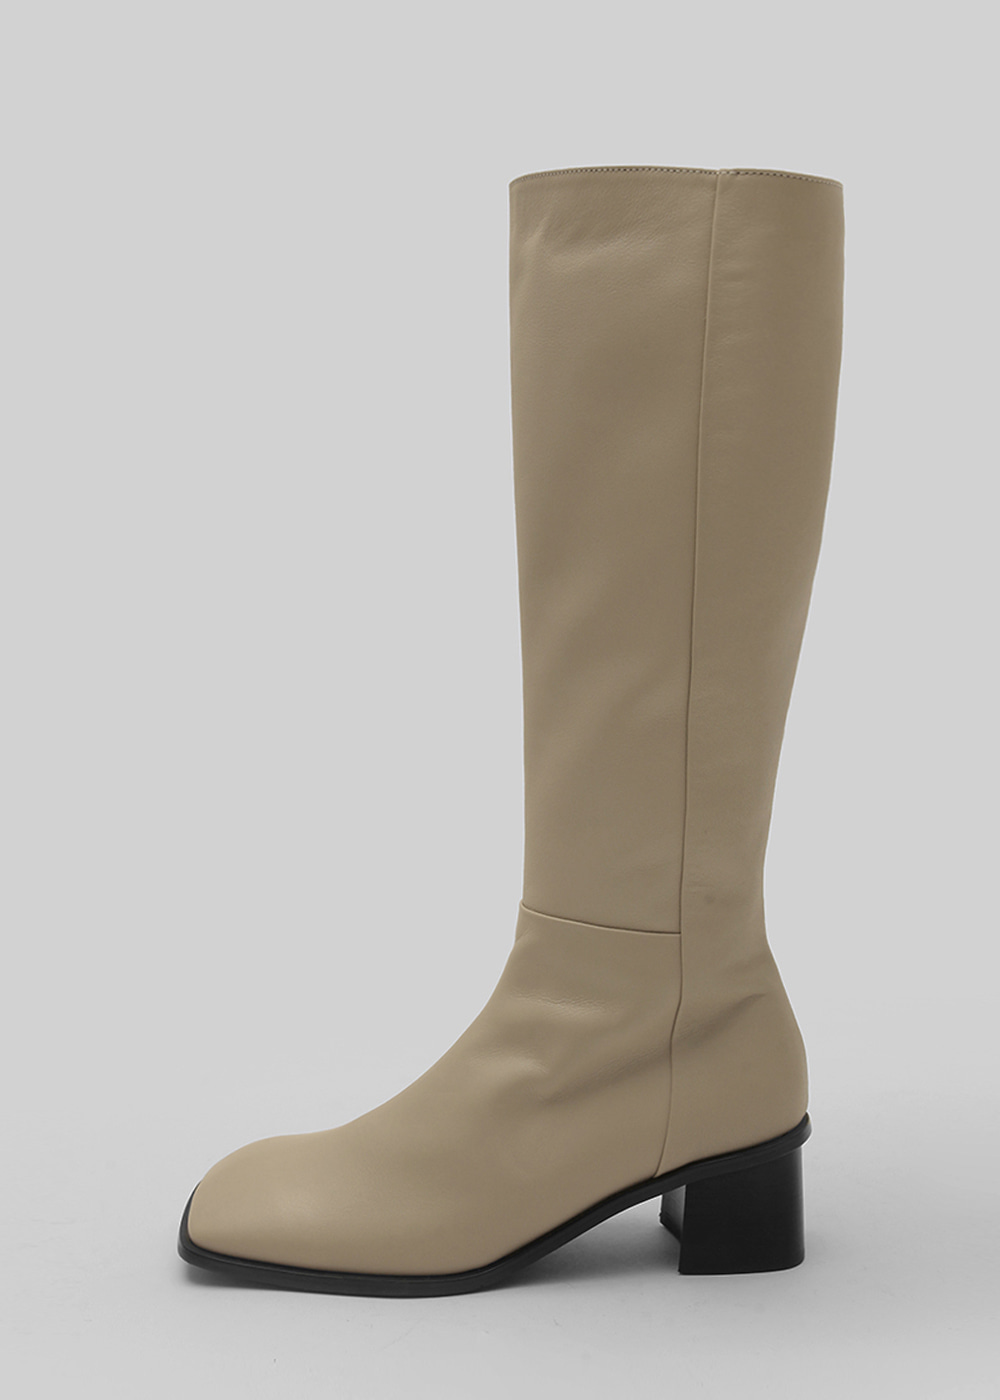 WIDE SQUARE LONG BOOTS [C1F03 BE]